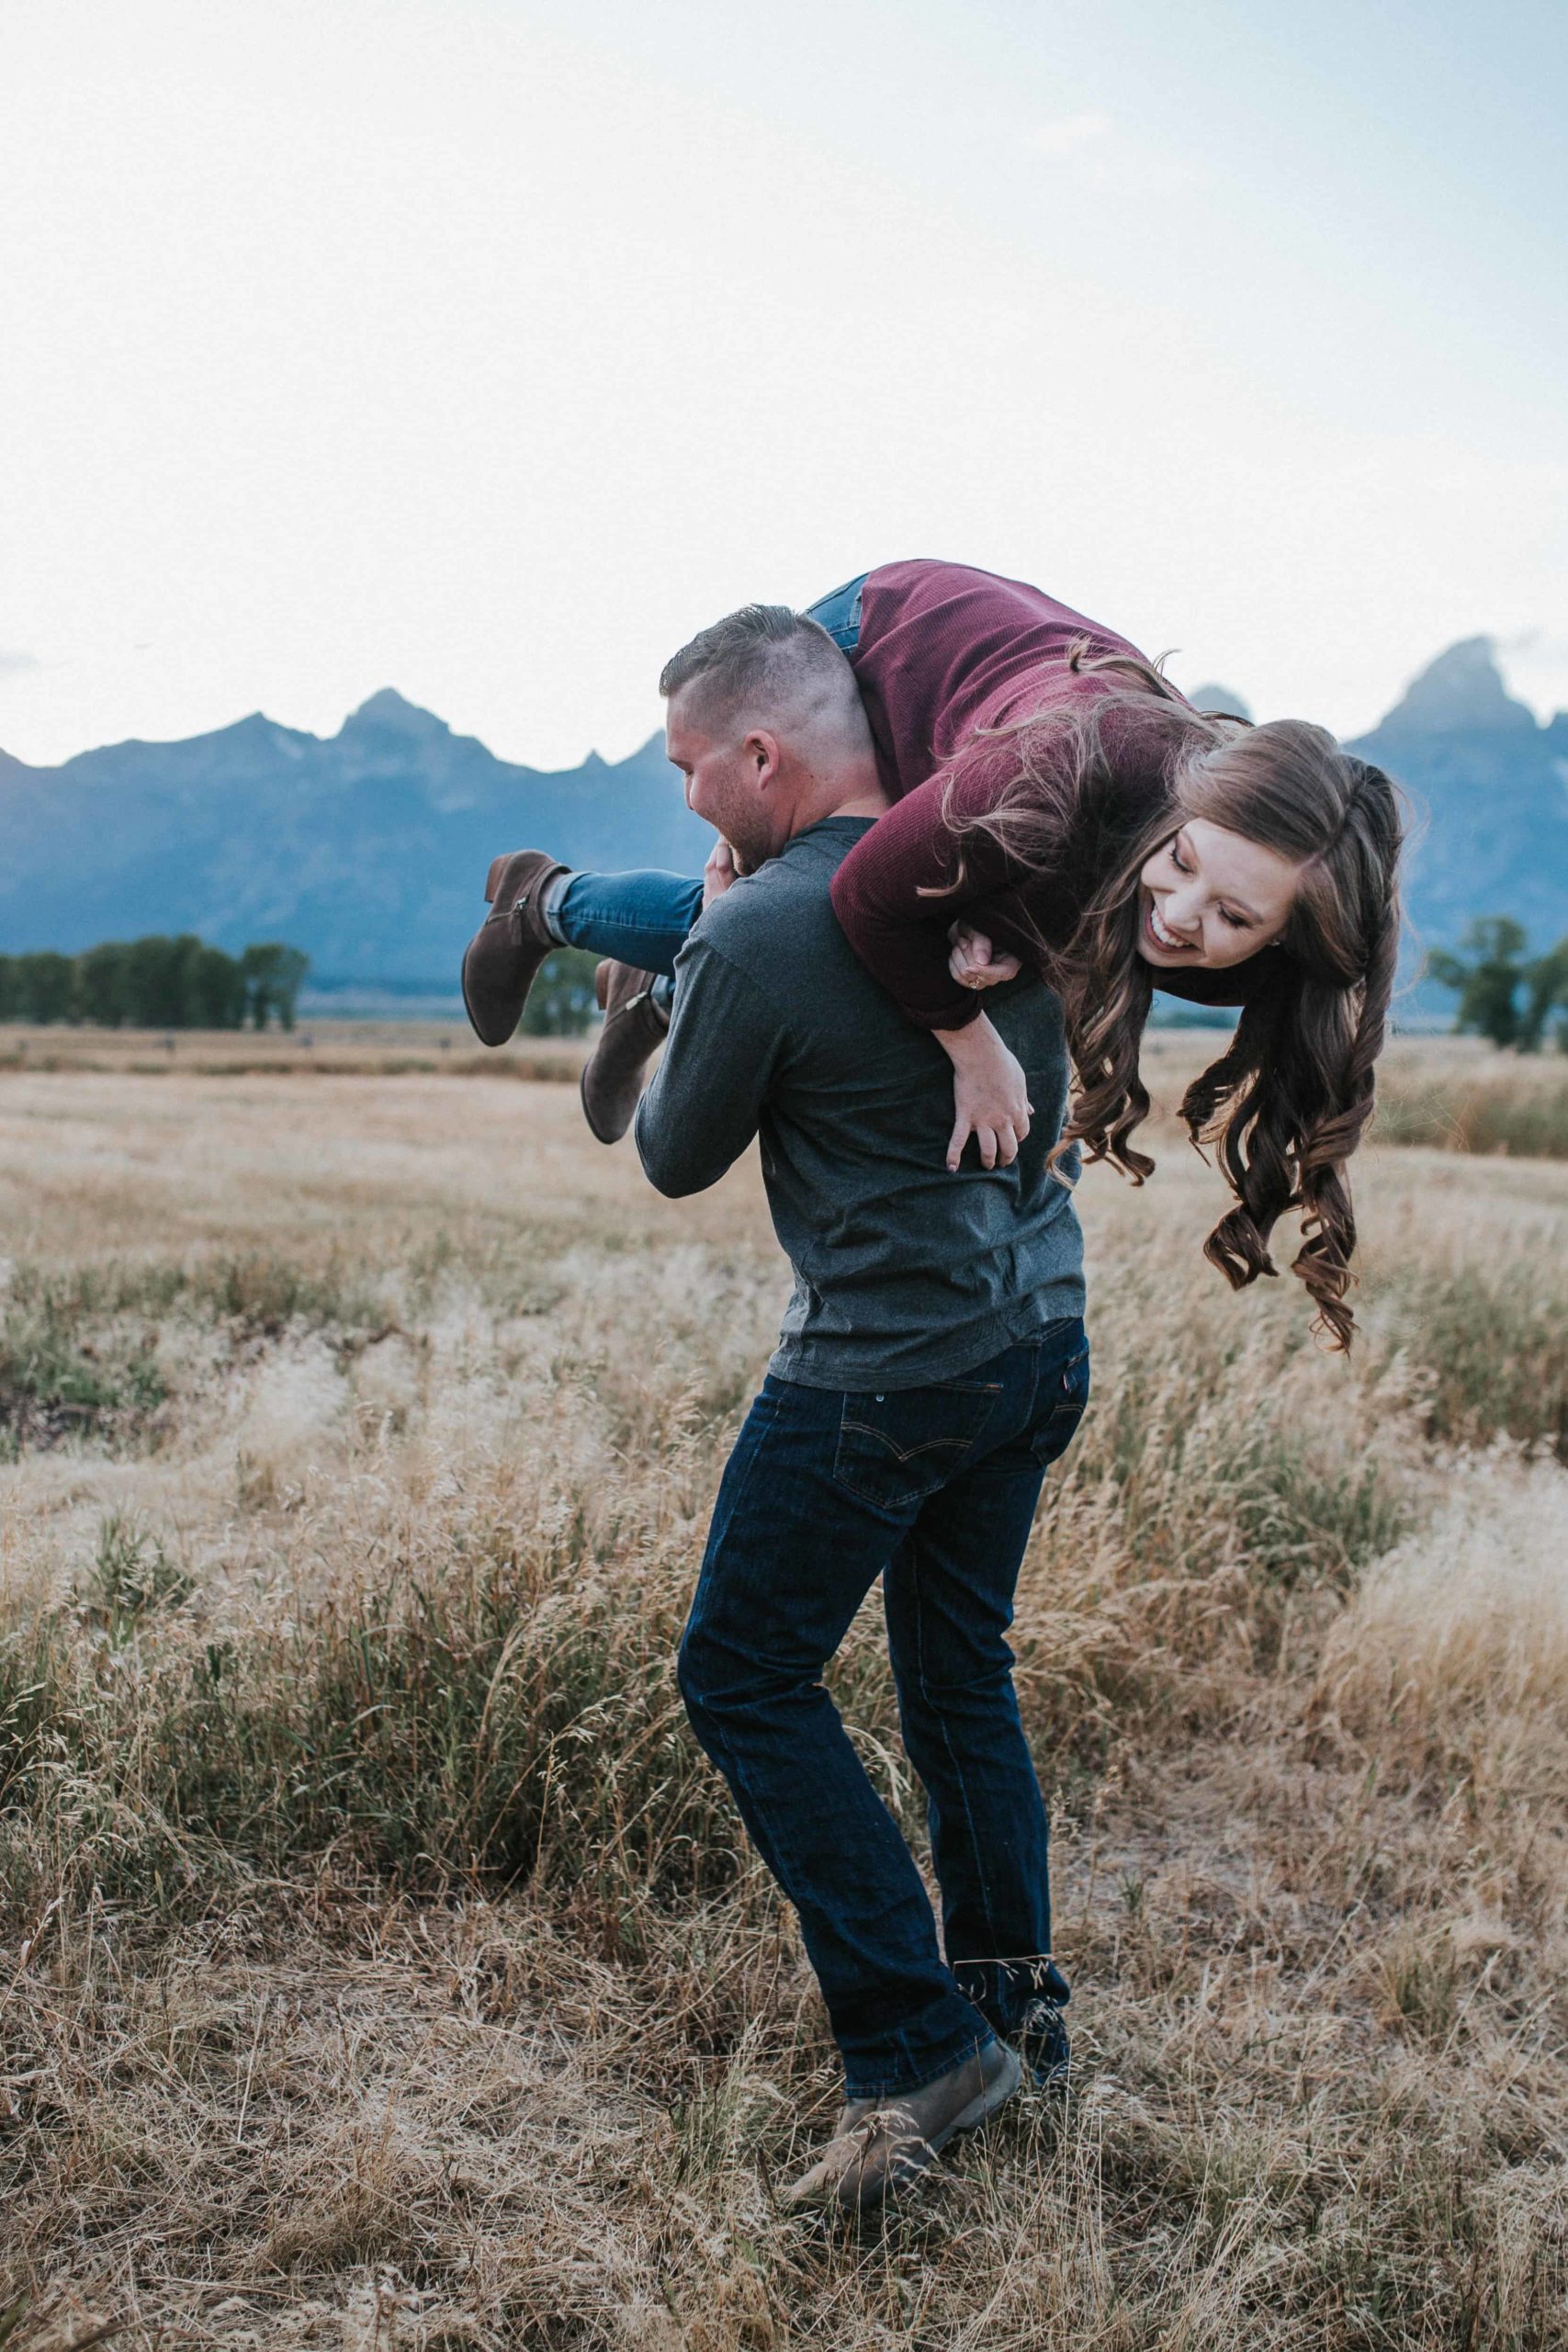 man picking up the woman and carrying her through a field for their fall engagement session